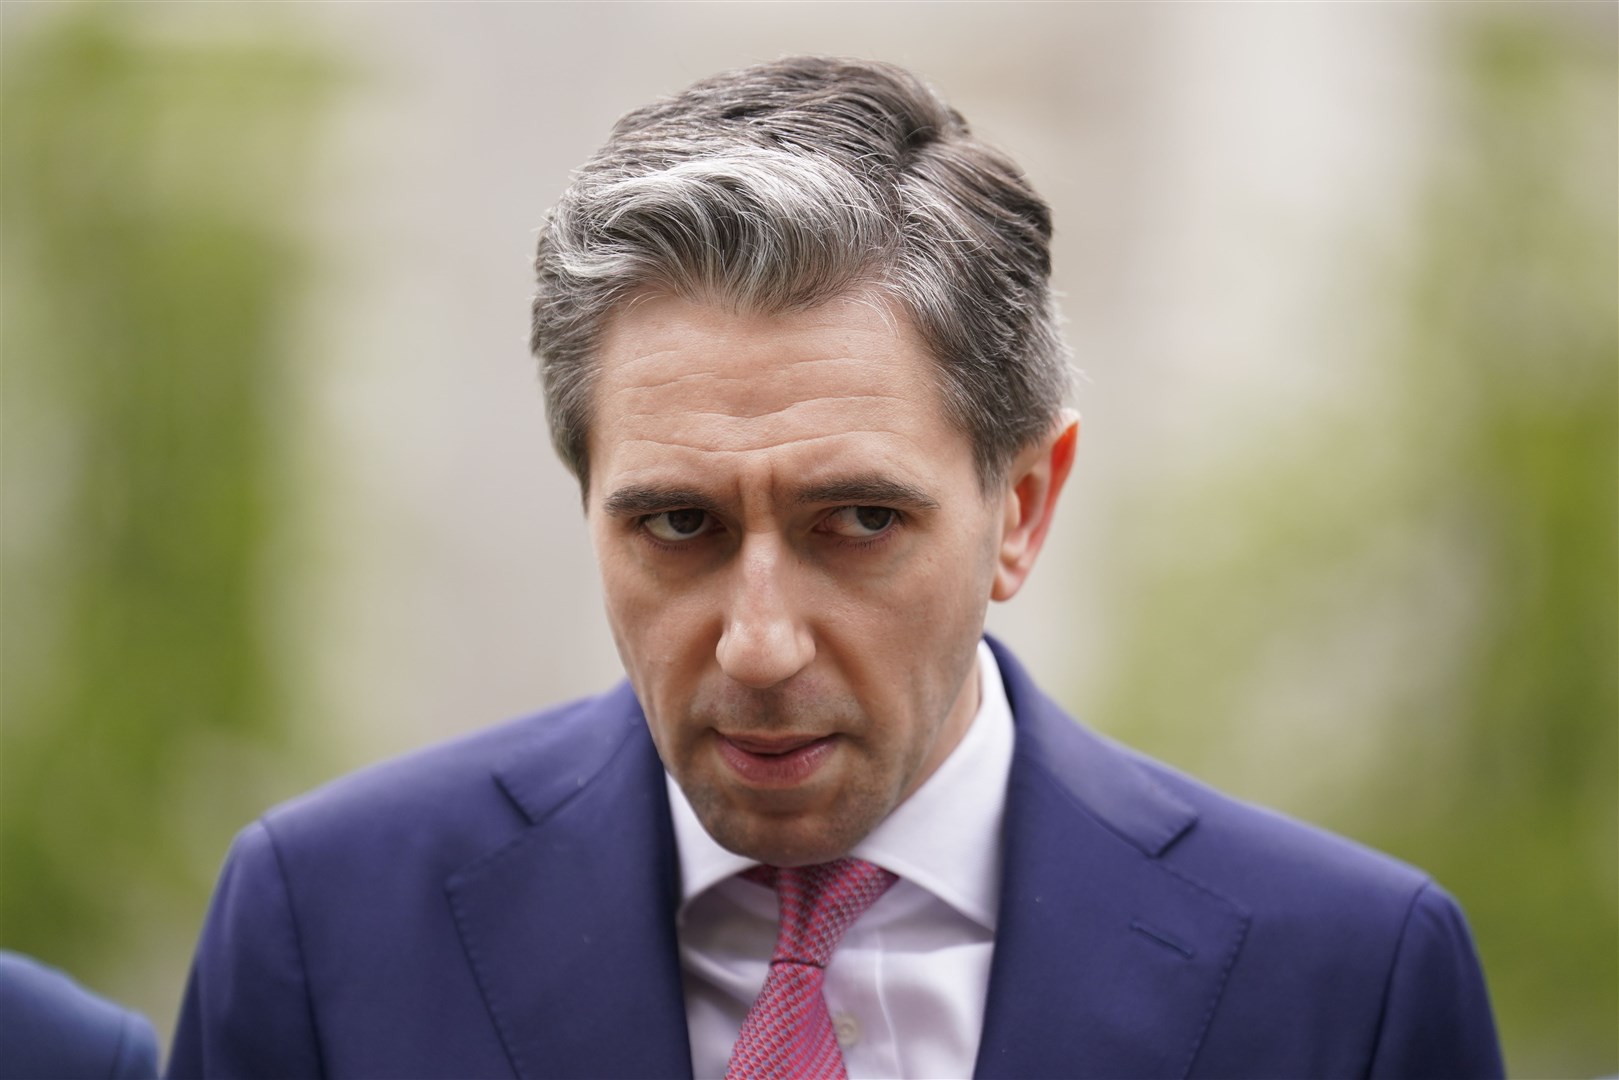 Simon Harris has previously said Ireland will not ‘provide a loophole’ for other countries’ migration ‘challenges’ (Brian Lawless/PA)